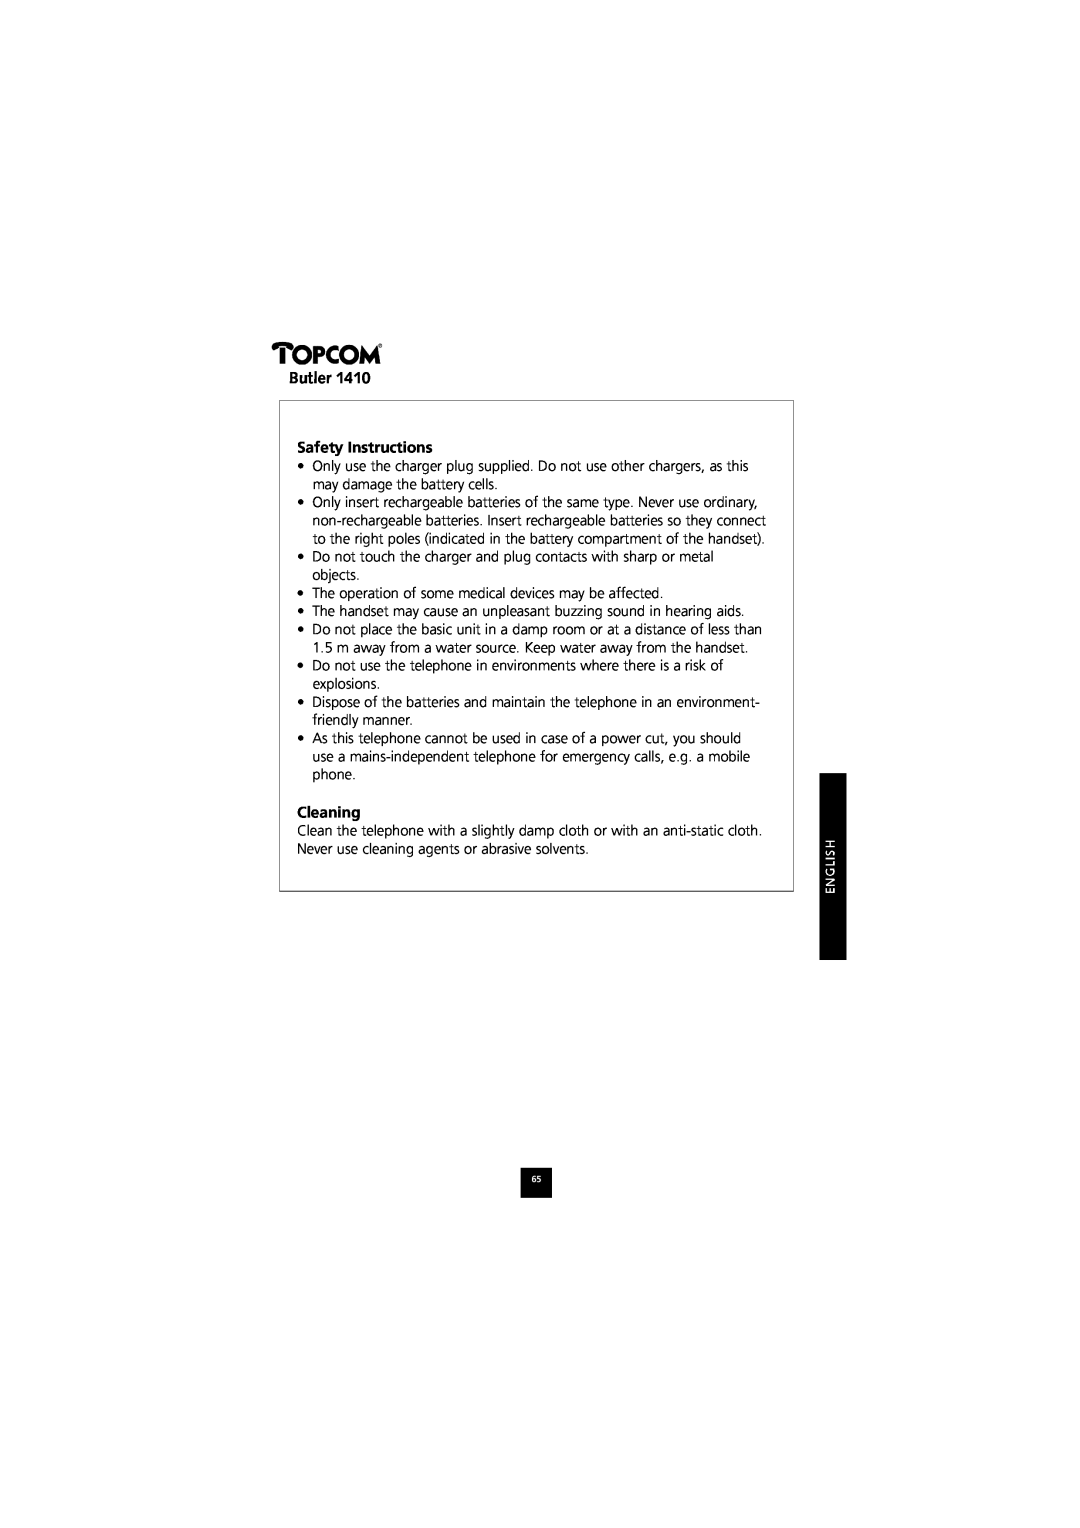 Topcom 1410 manual Safety Instructions, Cleaning, Butler 